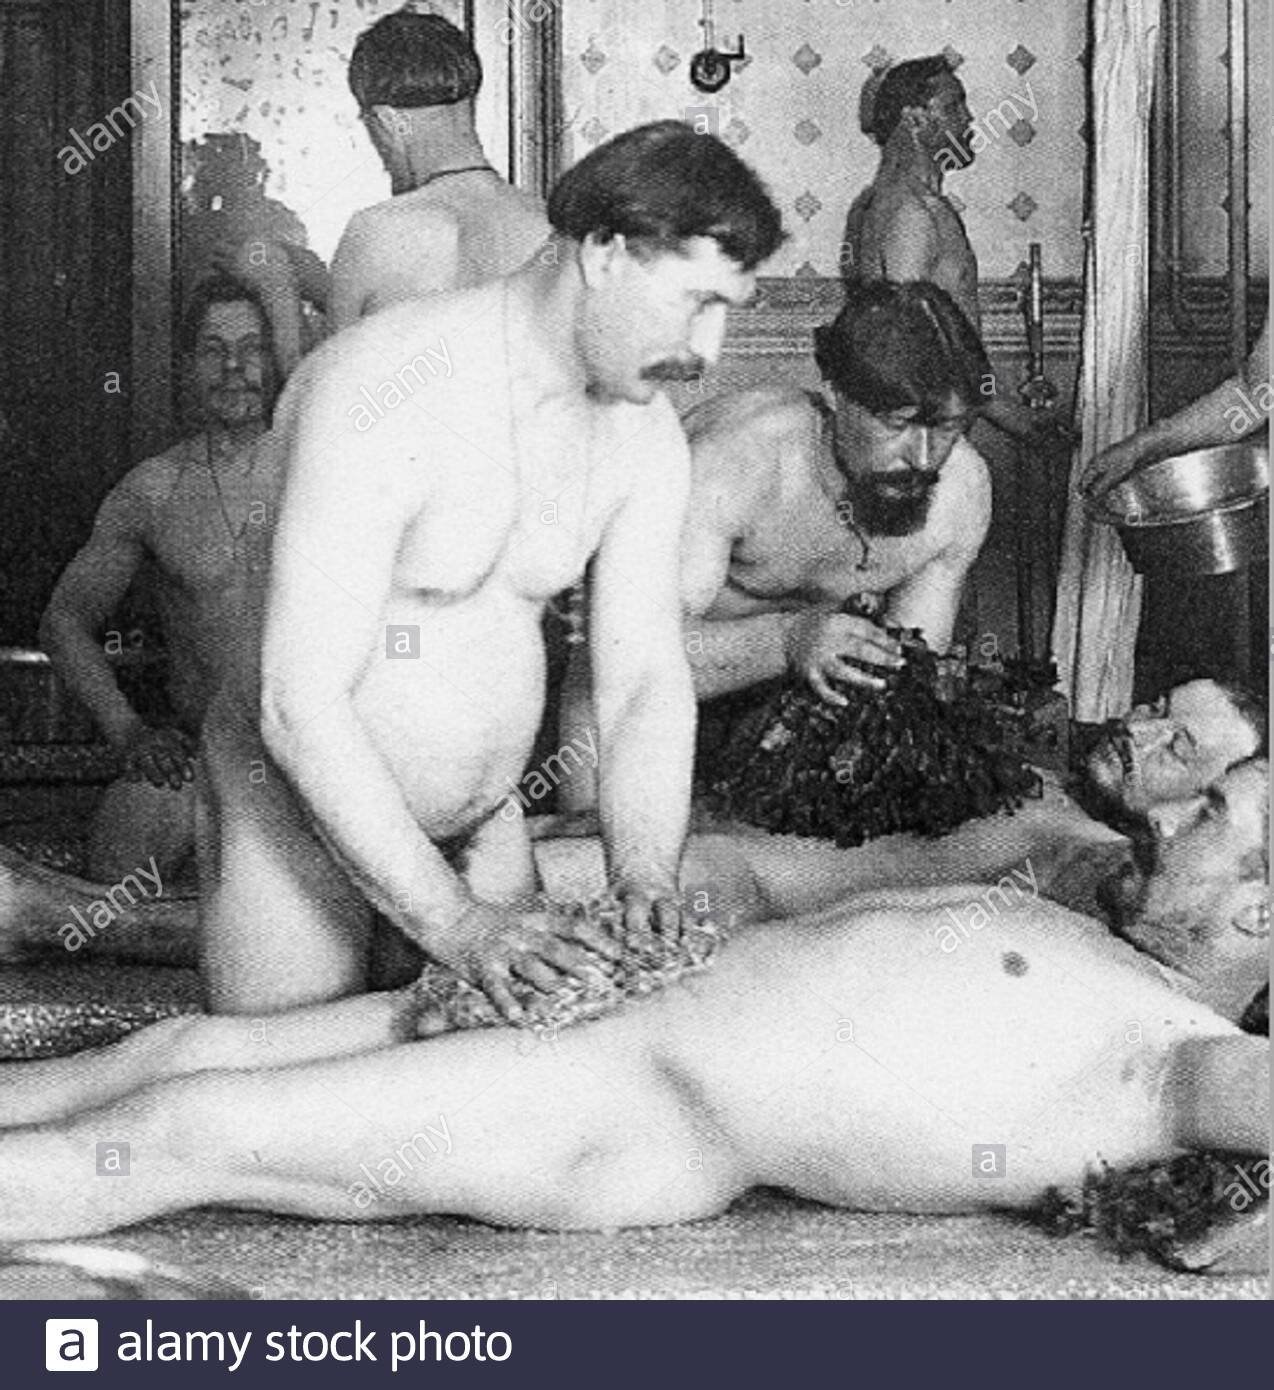 Male Vintage Porn From The 1800s